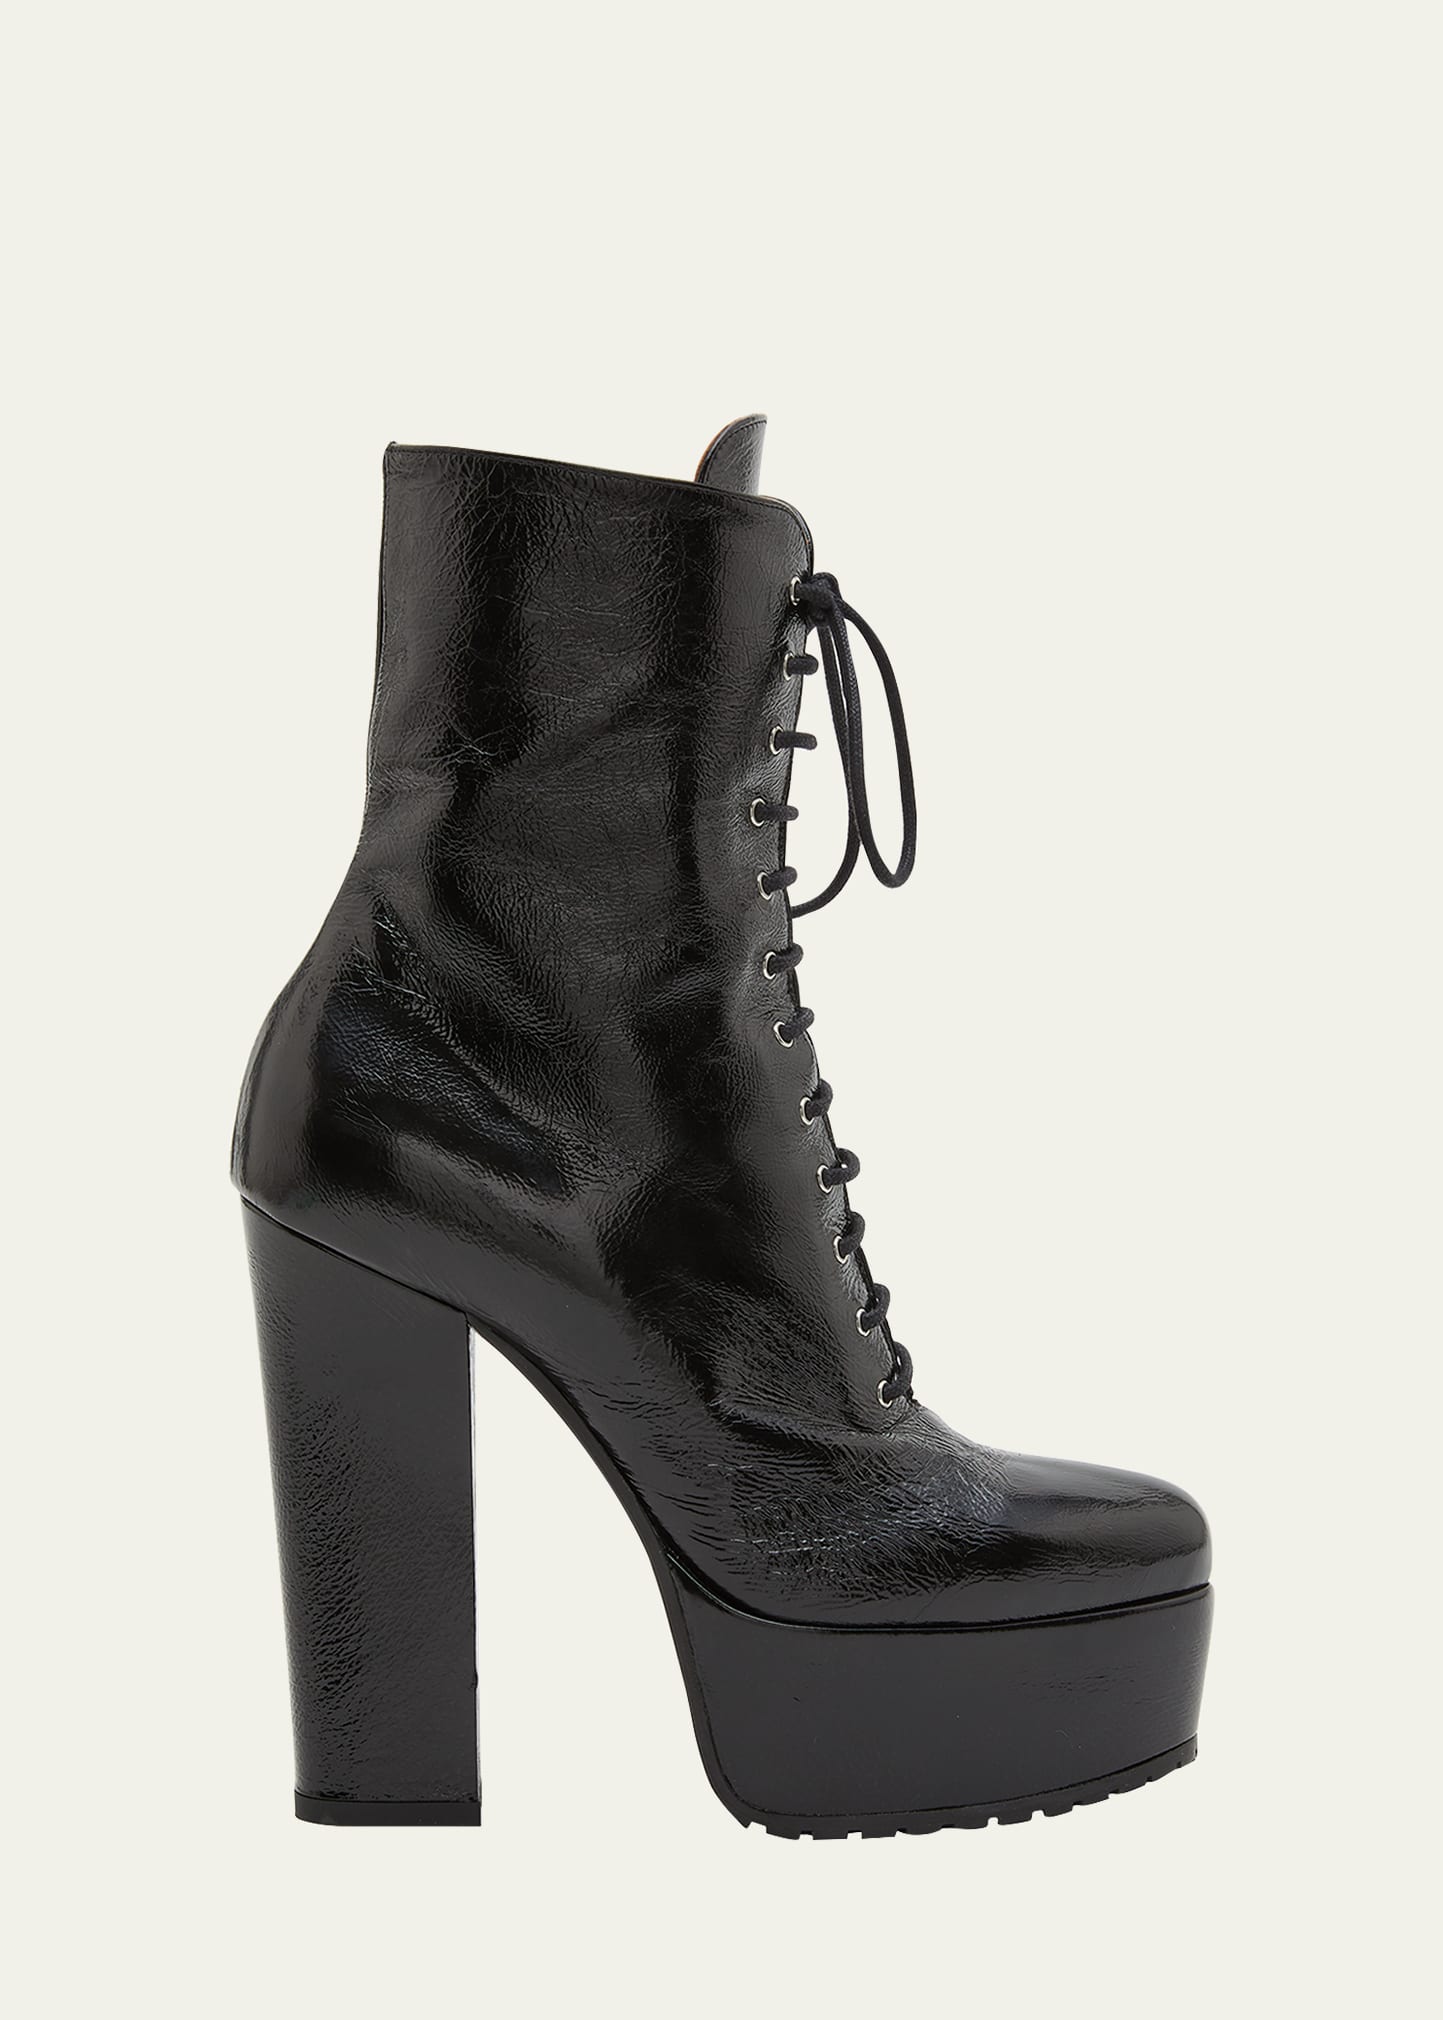 Leather Lace-Up Platform Booties